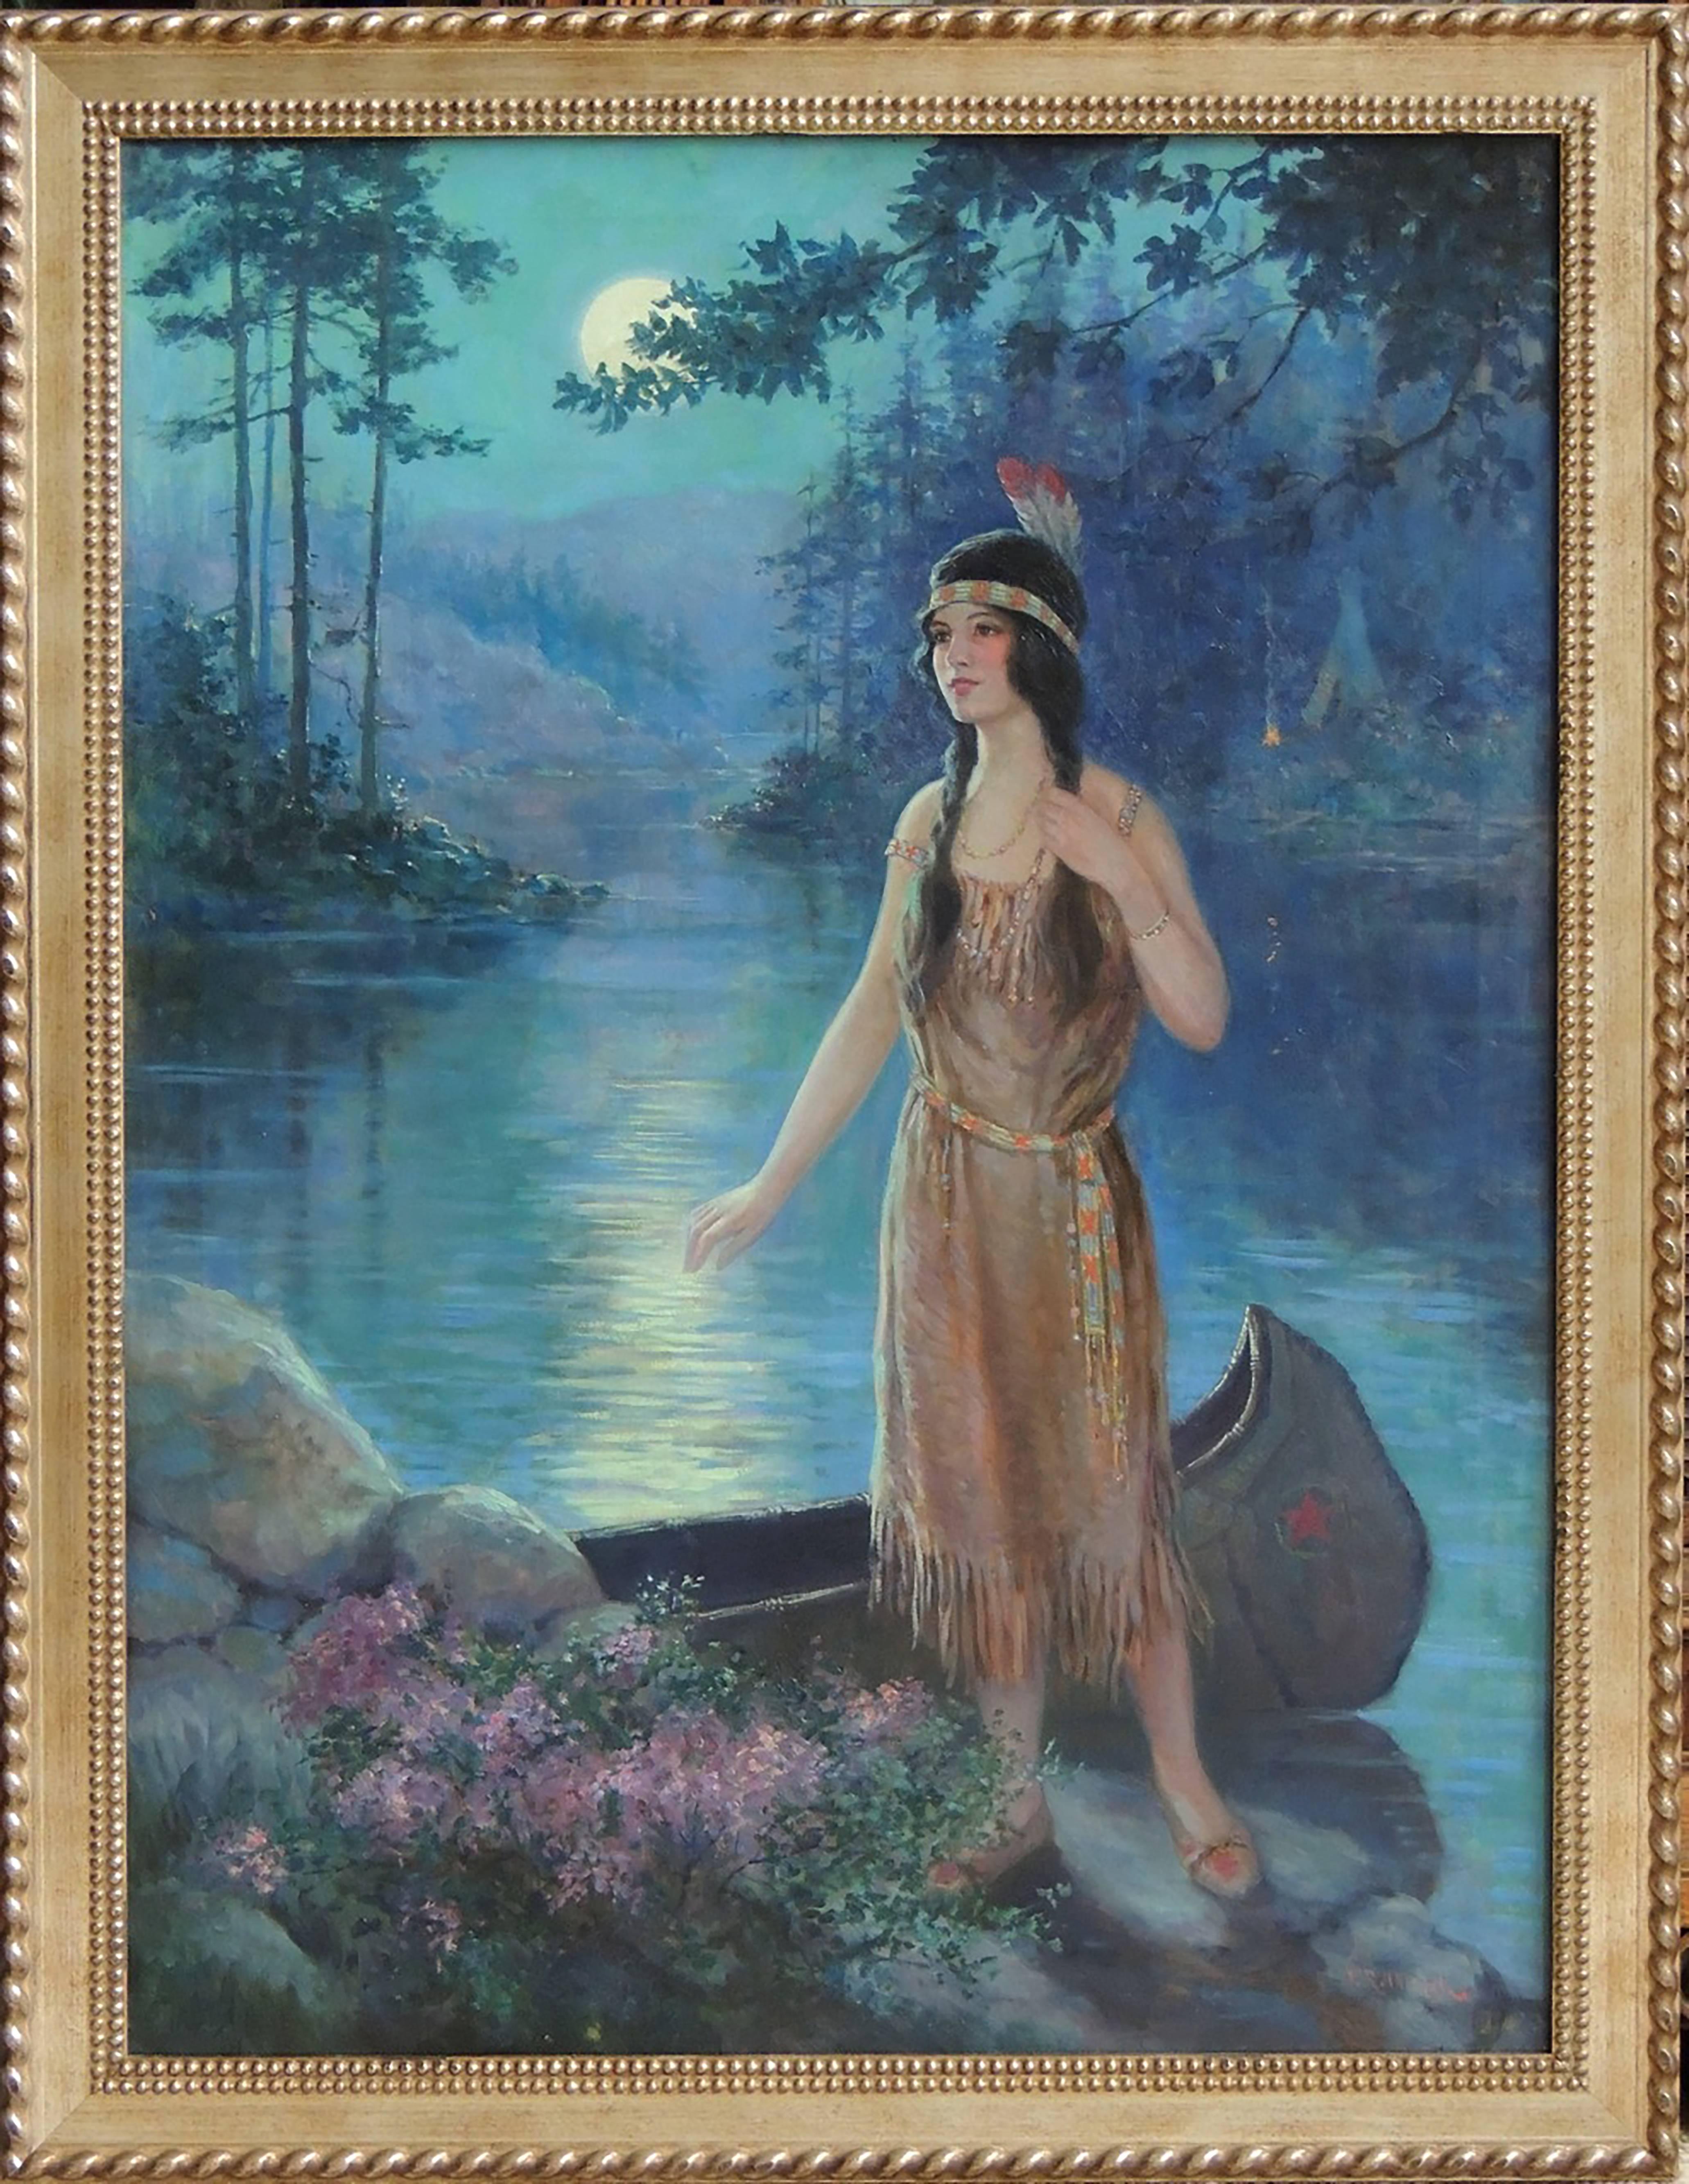 Indian Maiden - Painting by F.R. Harper